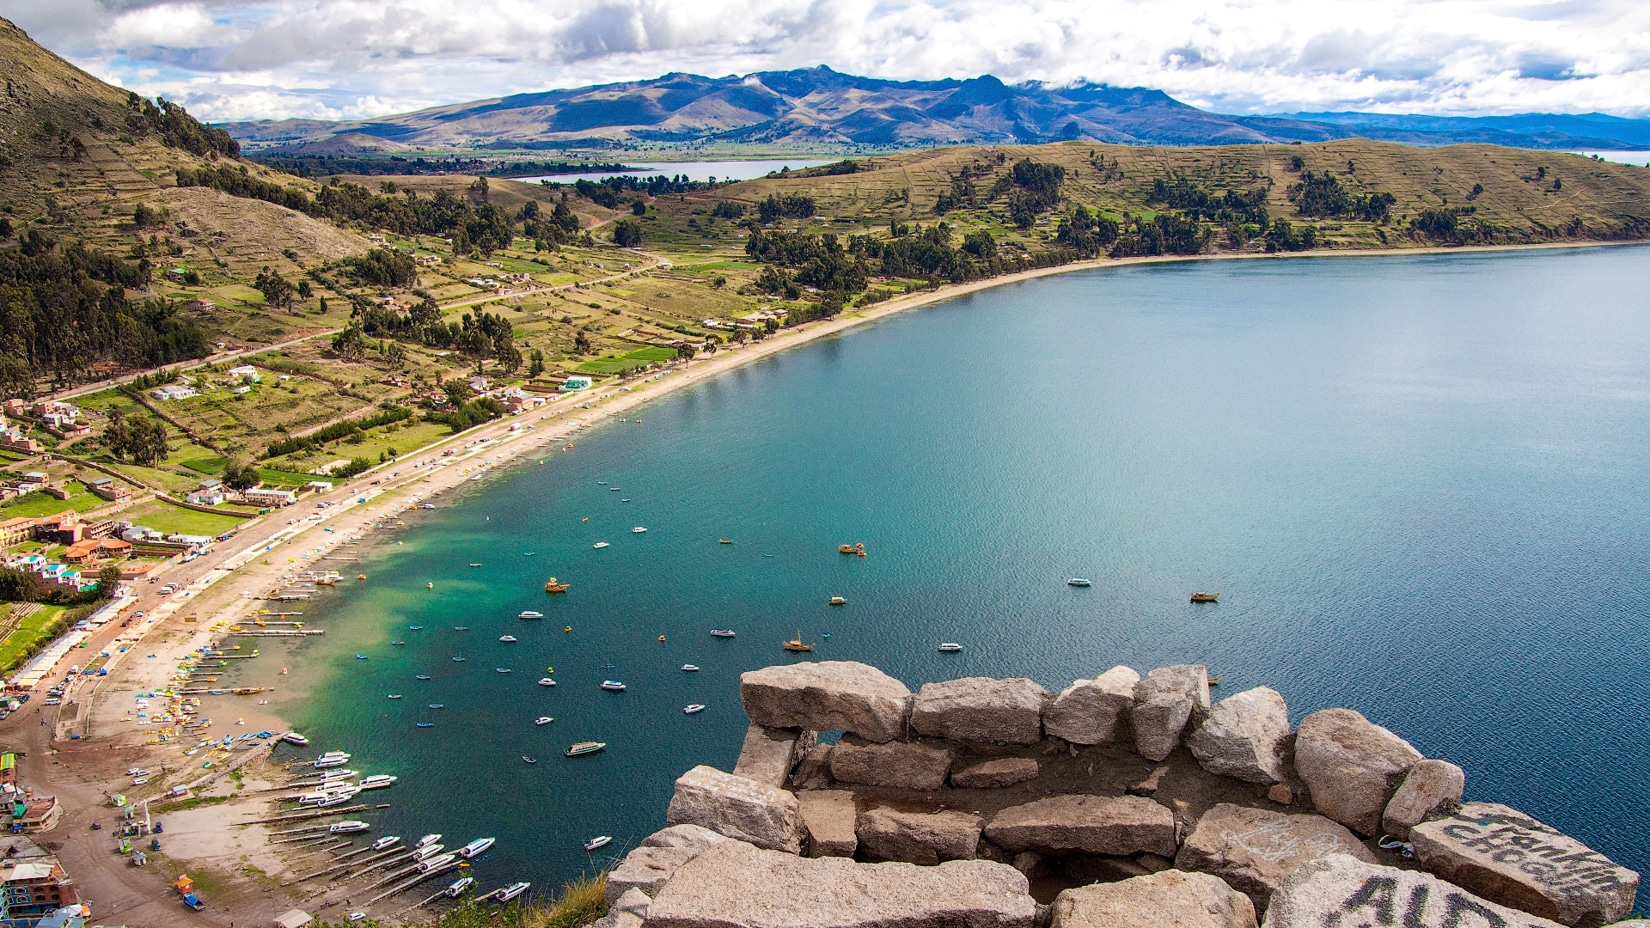 What are best things to do in the city of Puno - Orange Nation Peru